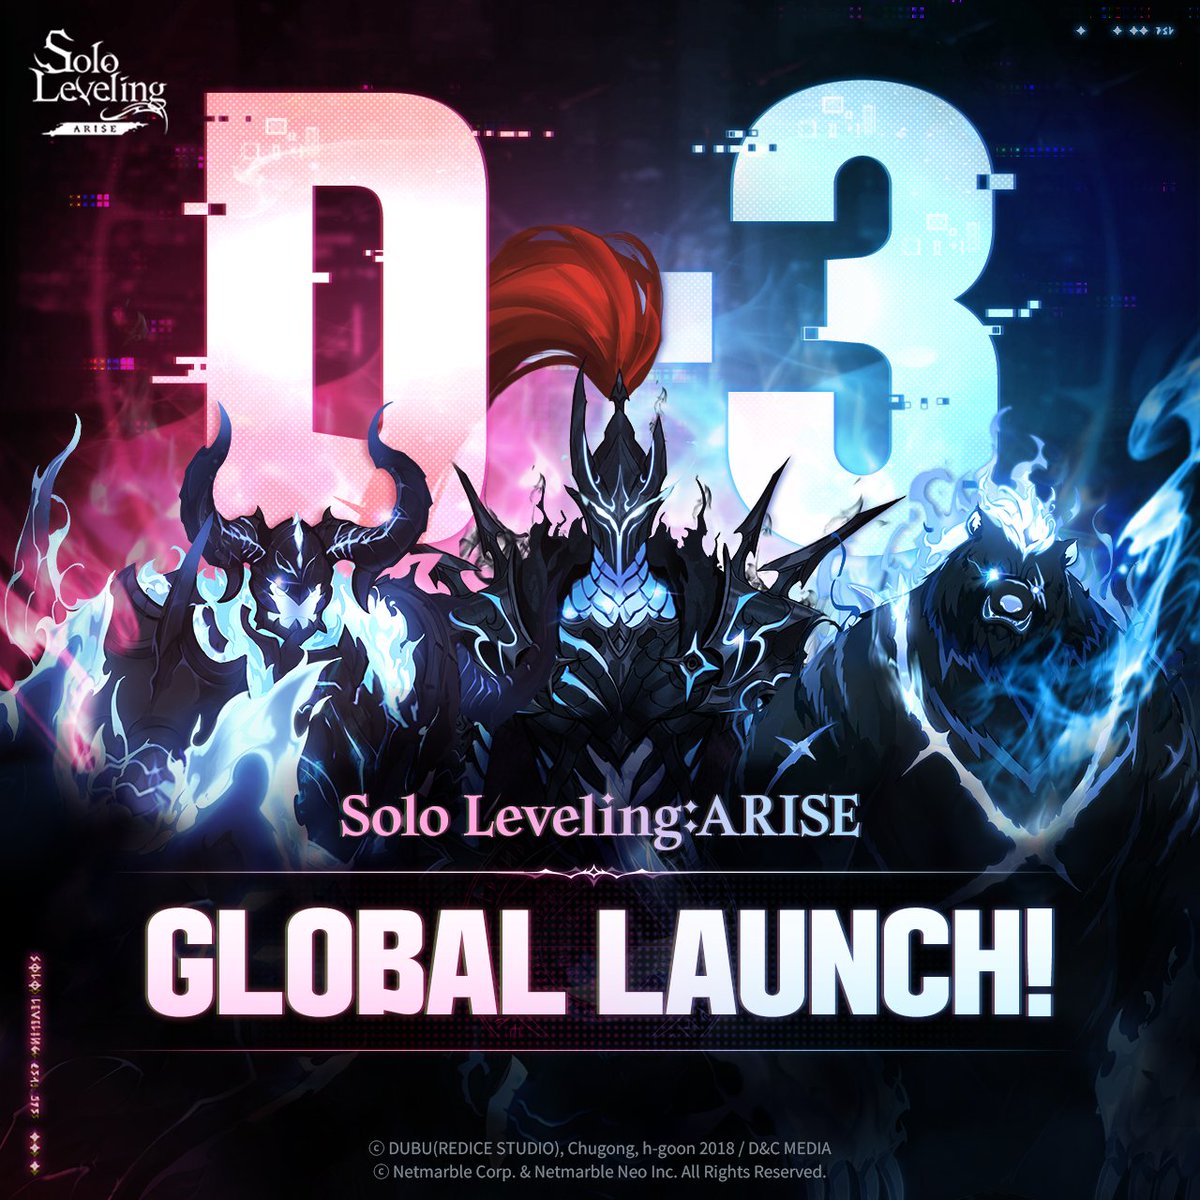 Only D-3 left until the Global Launch of Solo Leveling:ARISE! 🔥 The pre-registration is ending soon! Join us now!😘 👉 Pre-Register Now sololeveling.netmarble.com/en/preorder #sololevelingARISE #sololeveling #sololevelinggame #netmarble #onlyilevelup